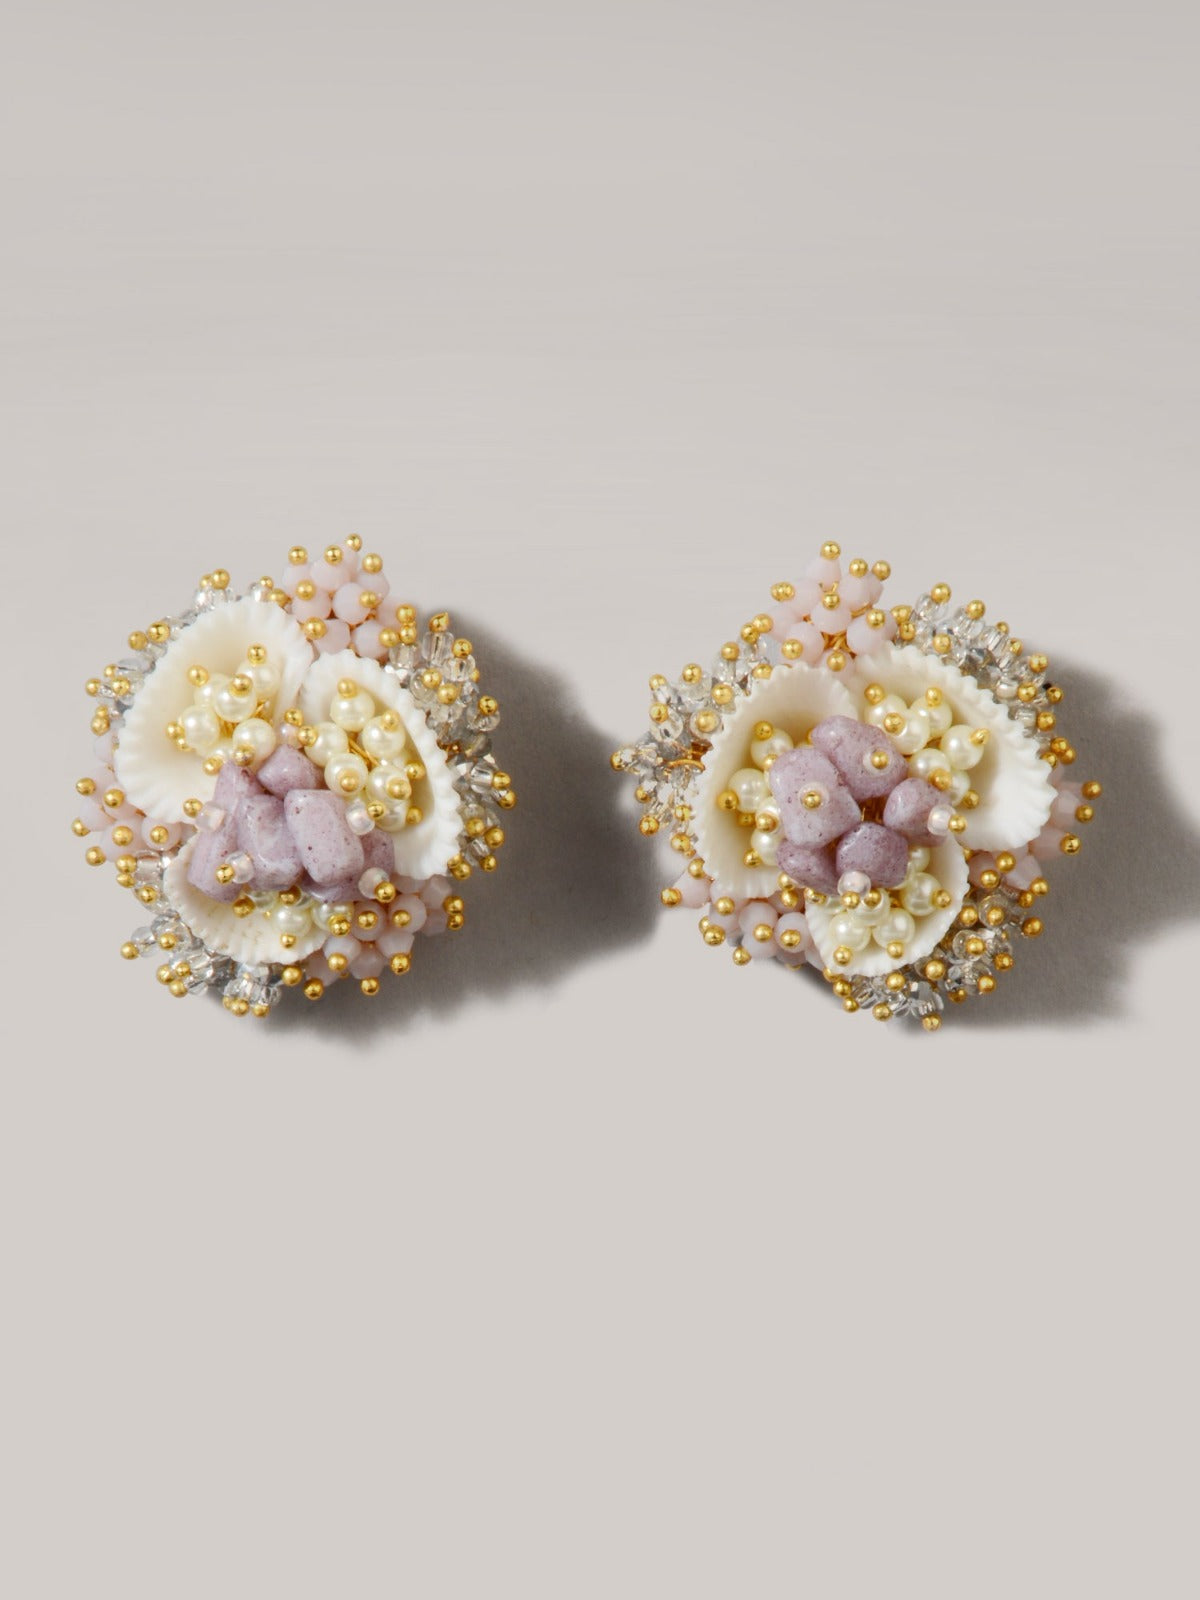 Amama,Akebia Quinata Cluster Bead Stud With Shell